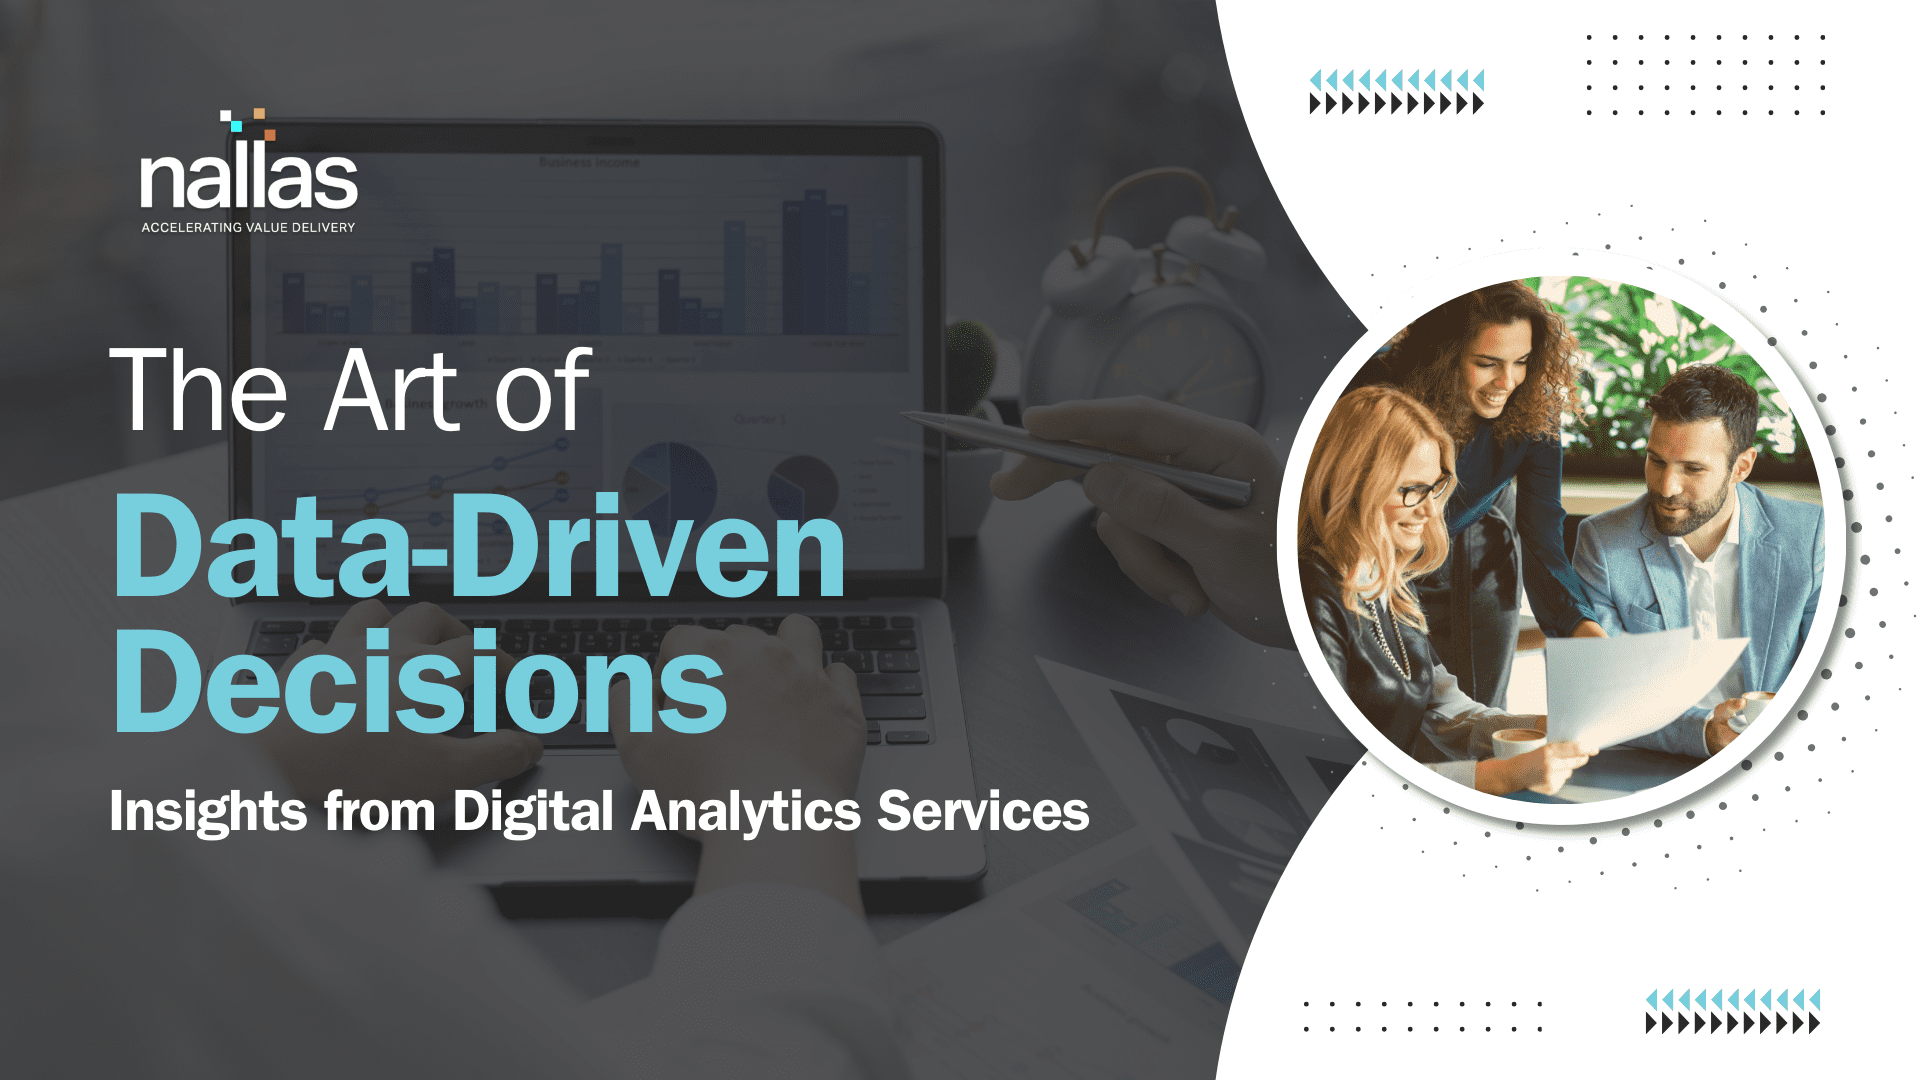 The Art of Data-Driven Decisions-Insights from Digital Analytics Services